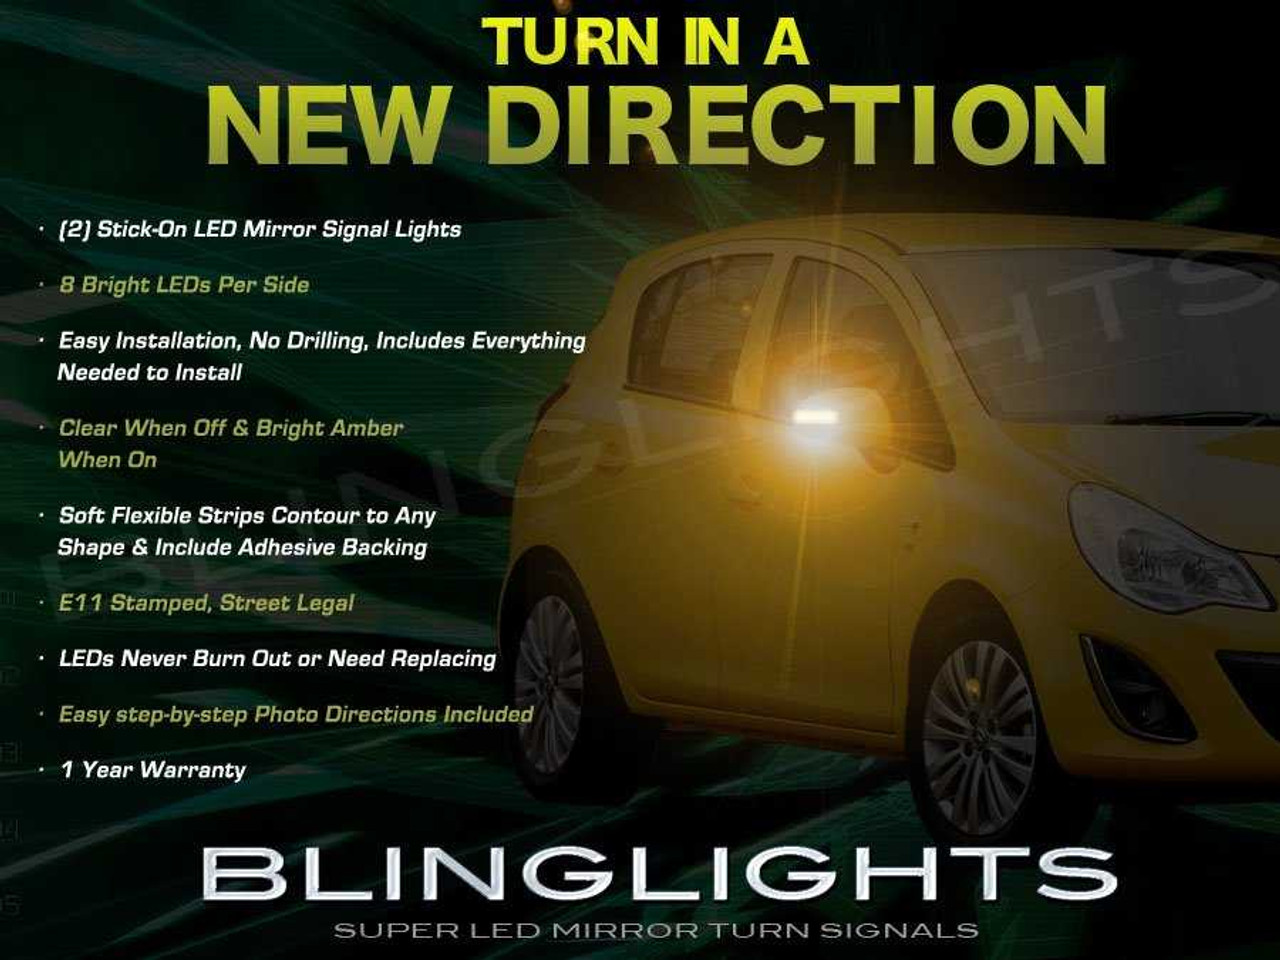 Vauxhall Meriva LED Side Mirrors Turnsignals Lights Mirror Turn Signals Lamps Signalers Accents